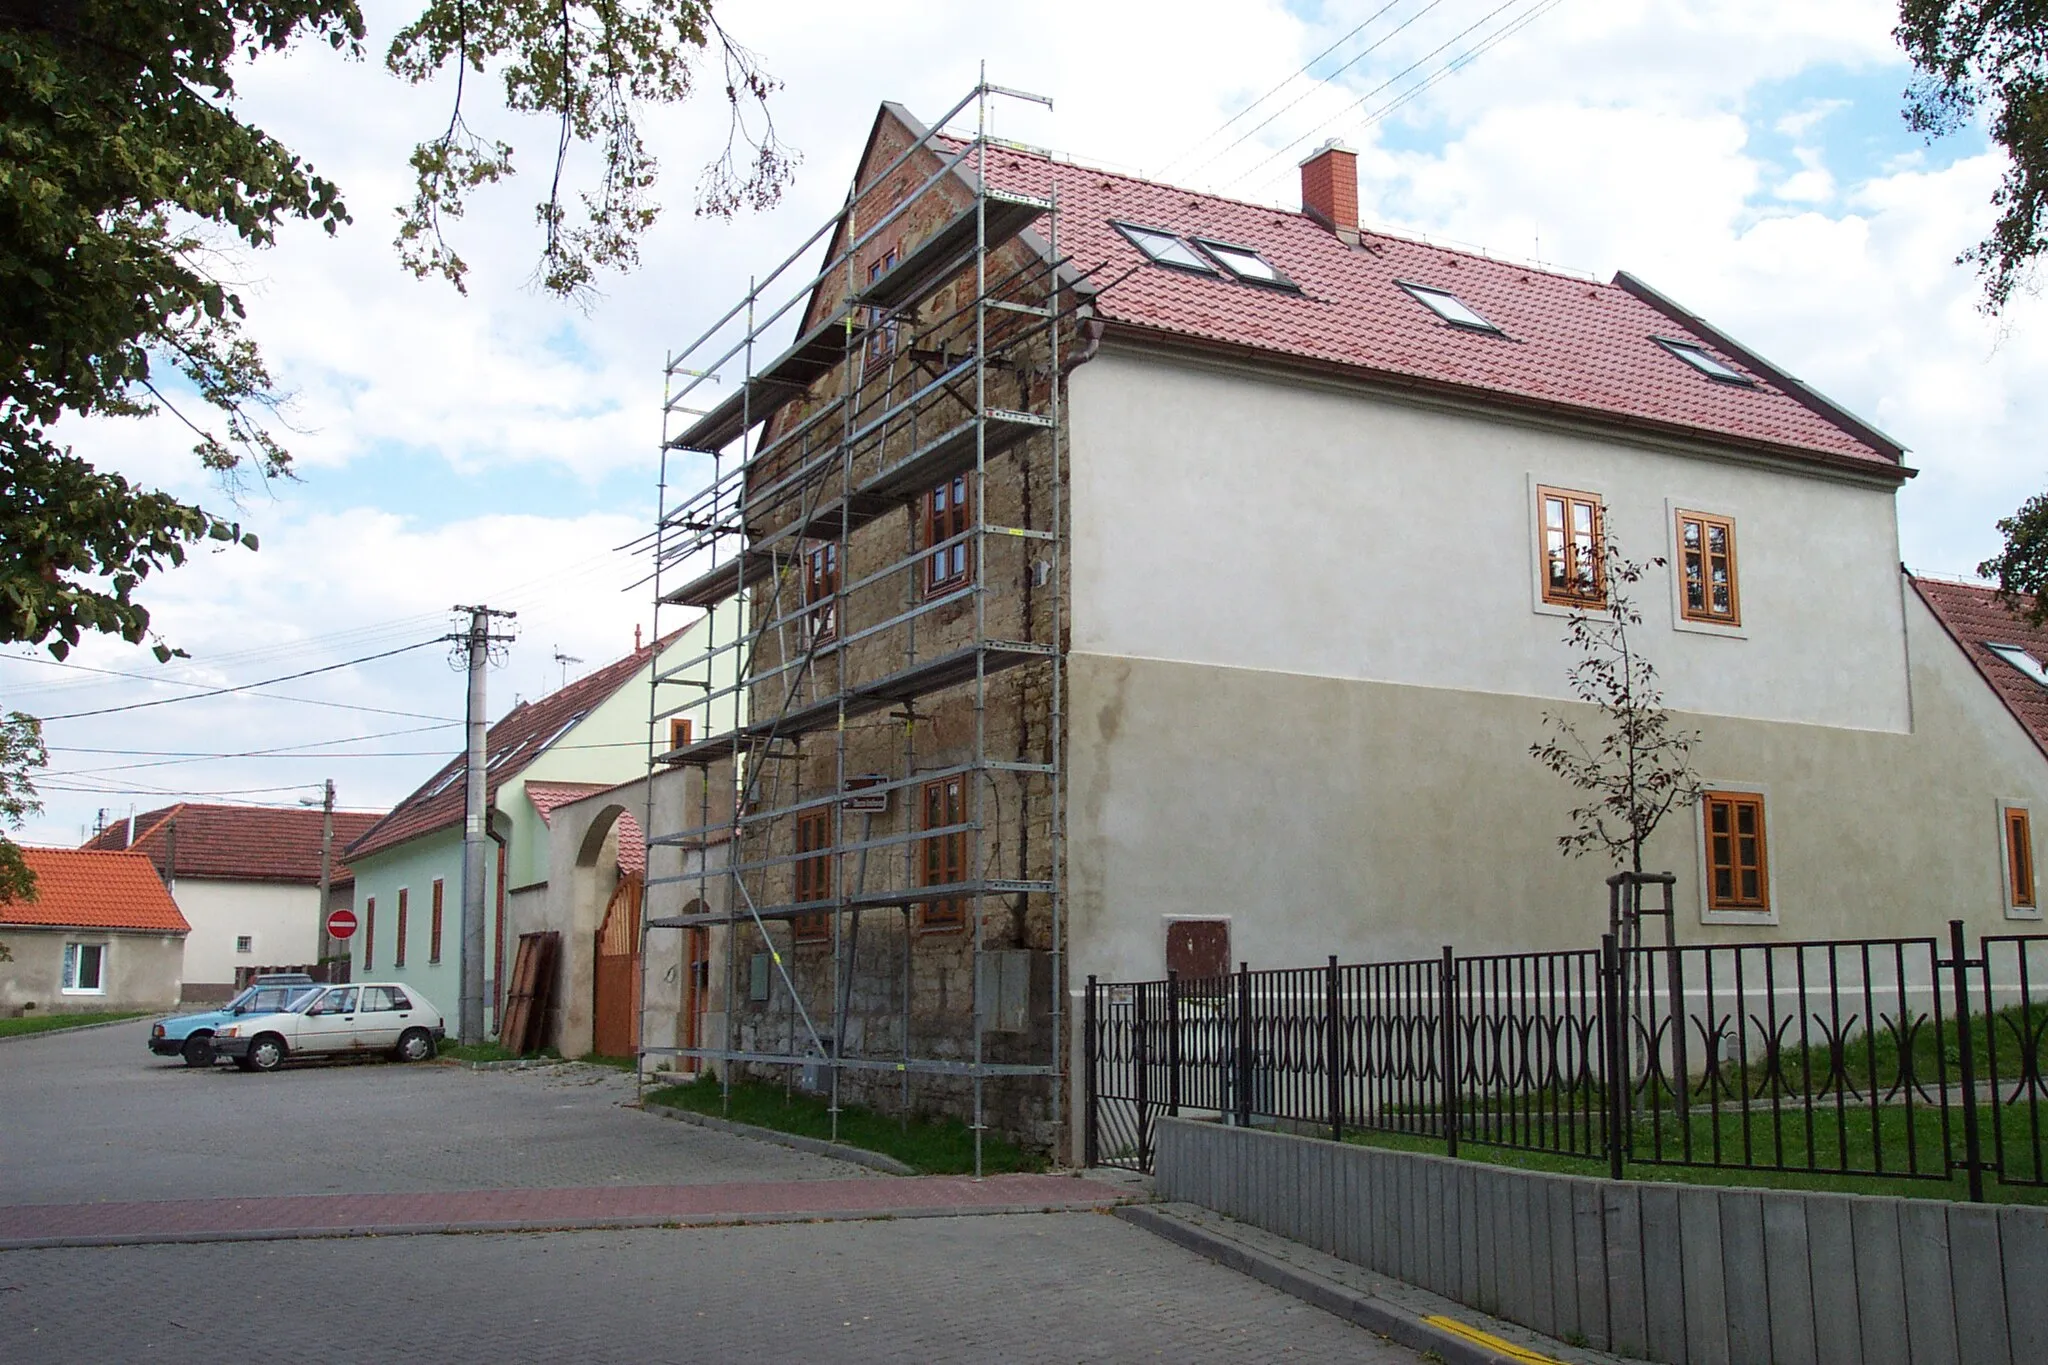 Photo showing: Horoměrice, village near Prague, its buildings and also buildings in surroundings